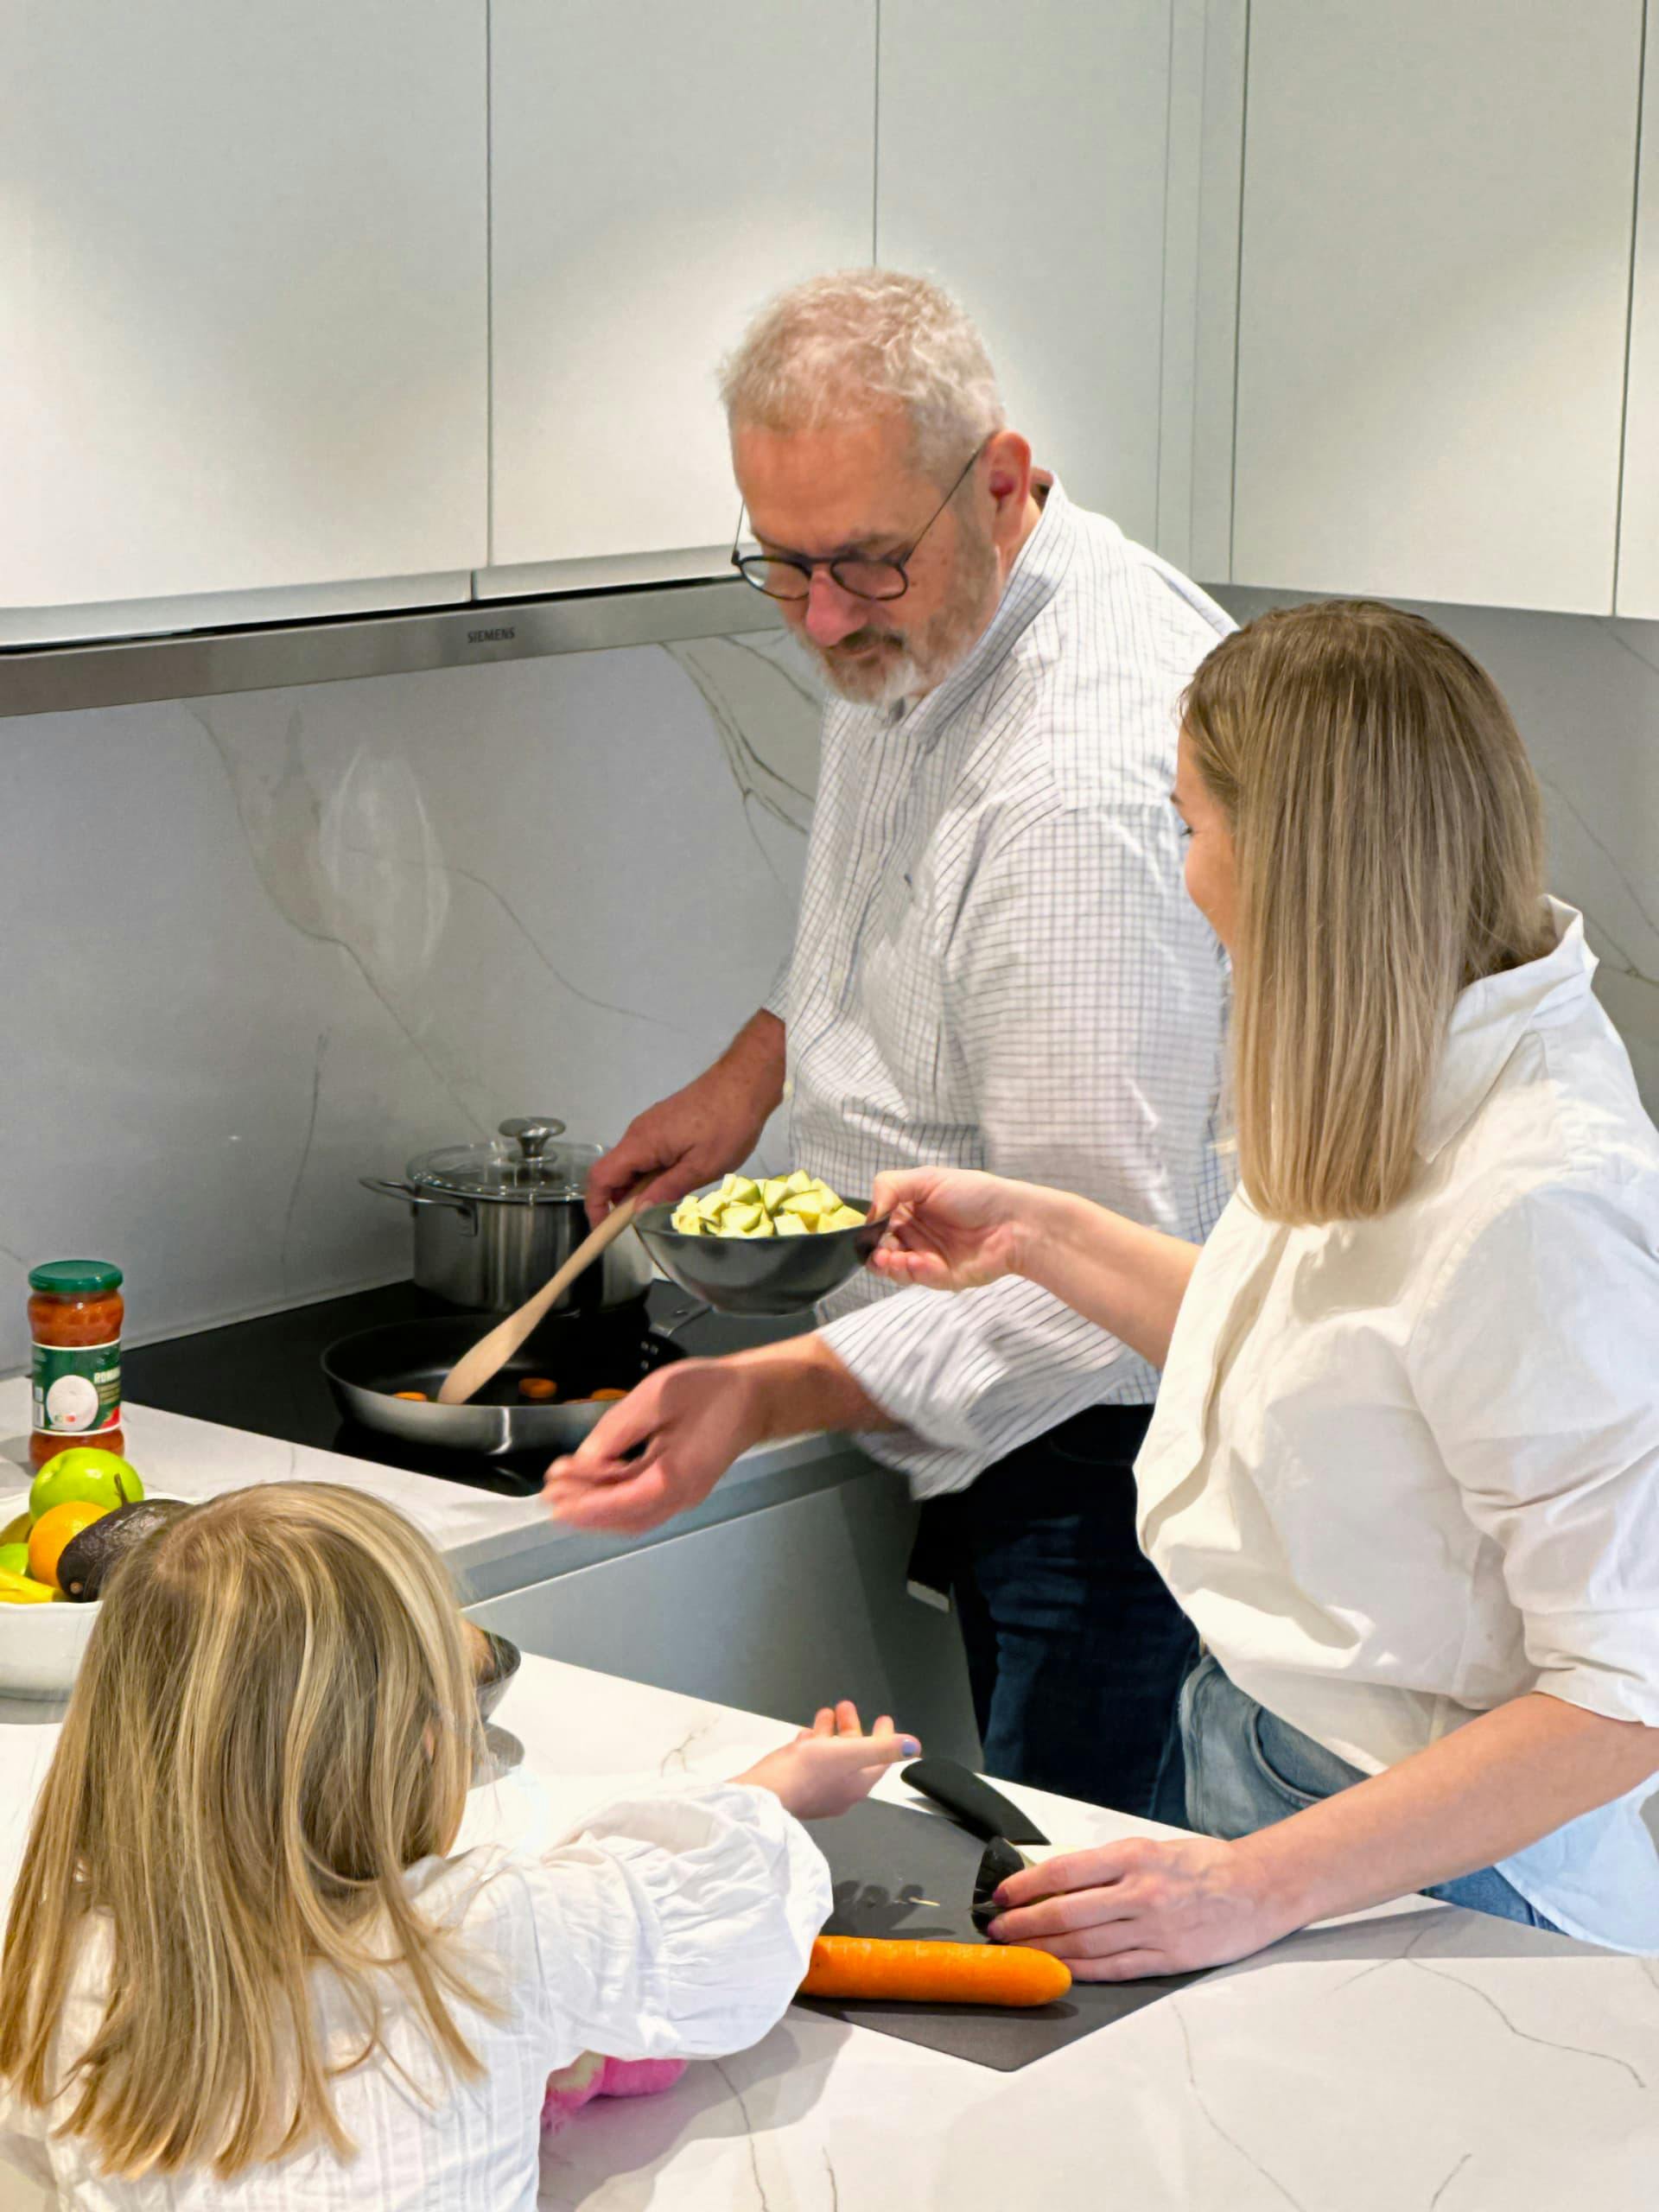 A family is cooking in a kitchen